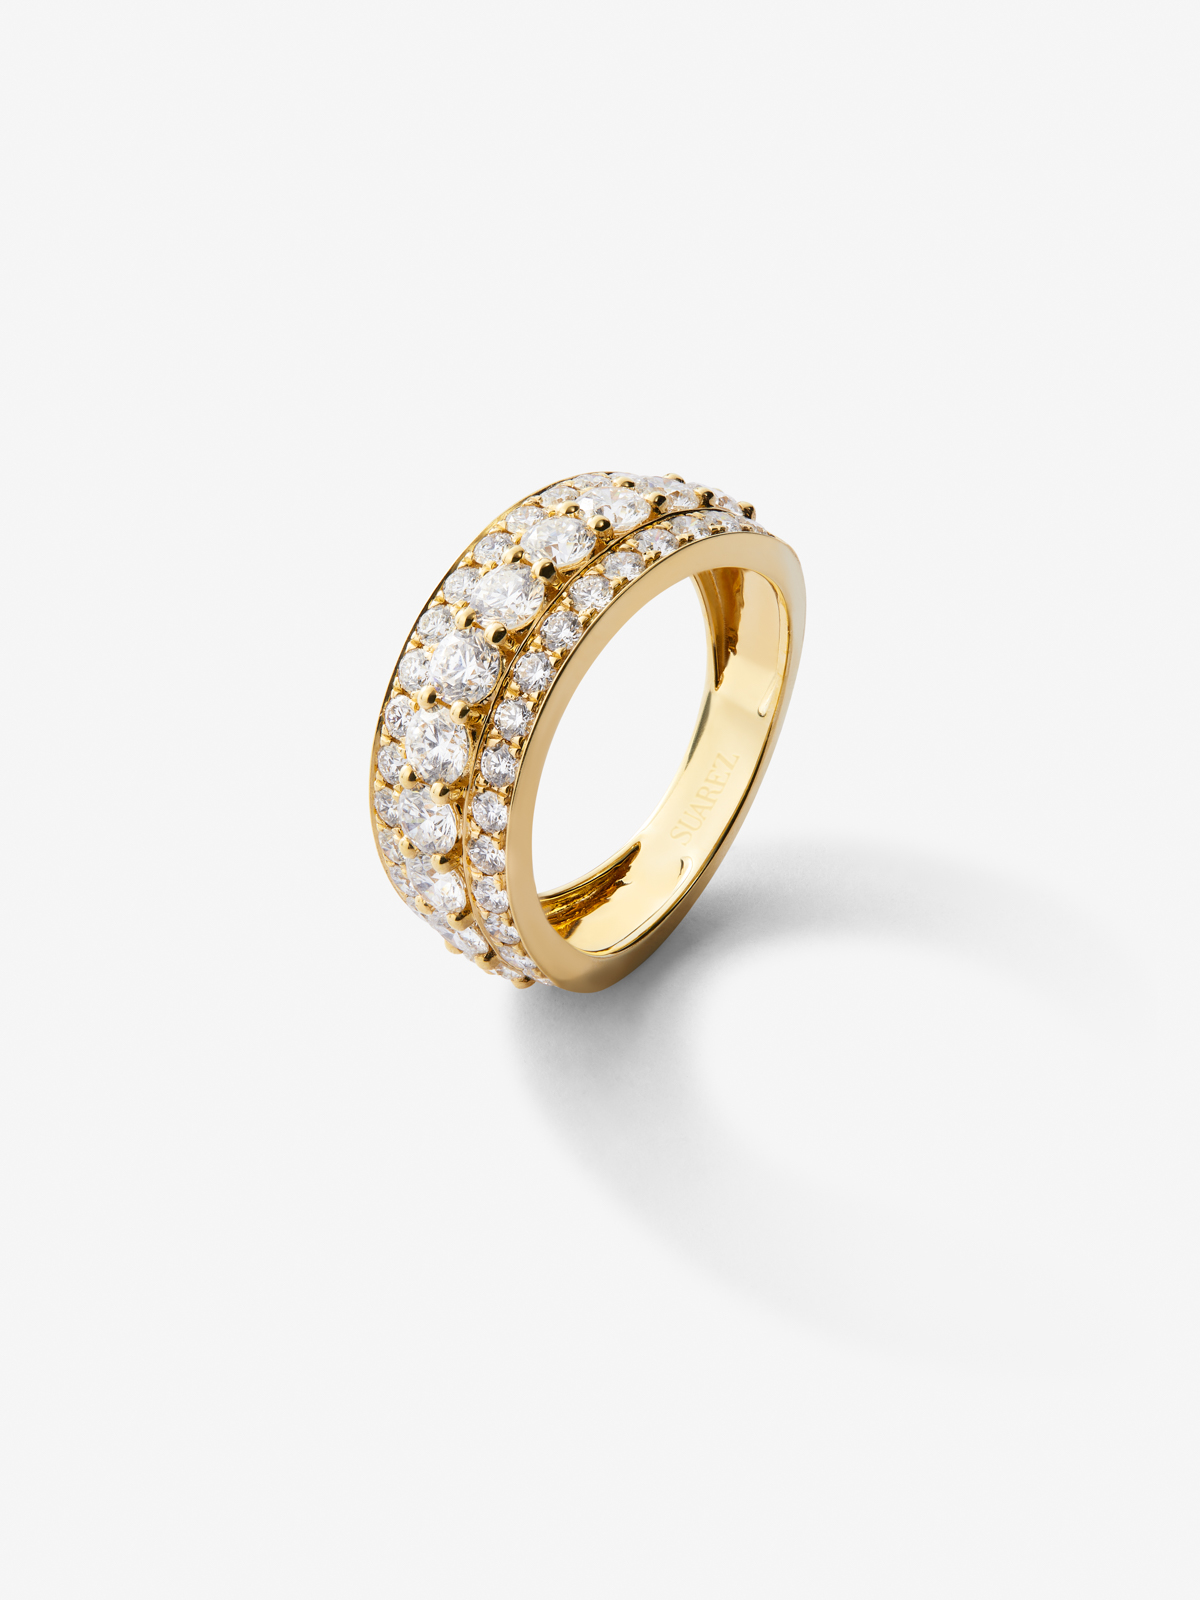 18K yellow gold ring with white diamonds in 2.08 cts